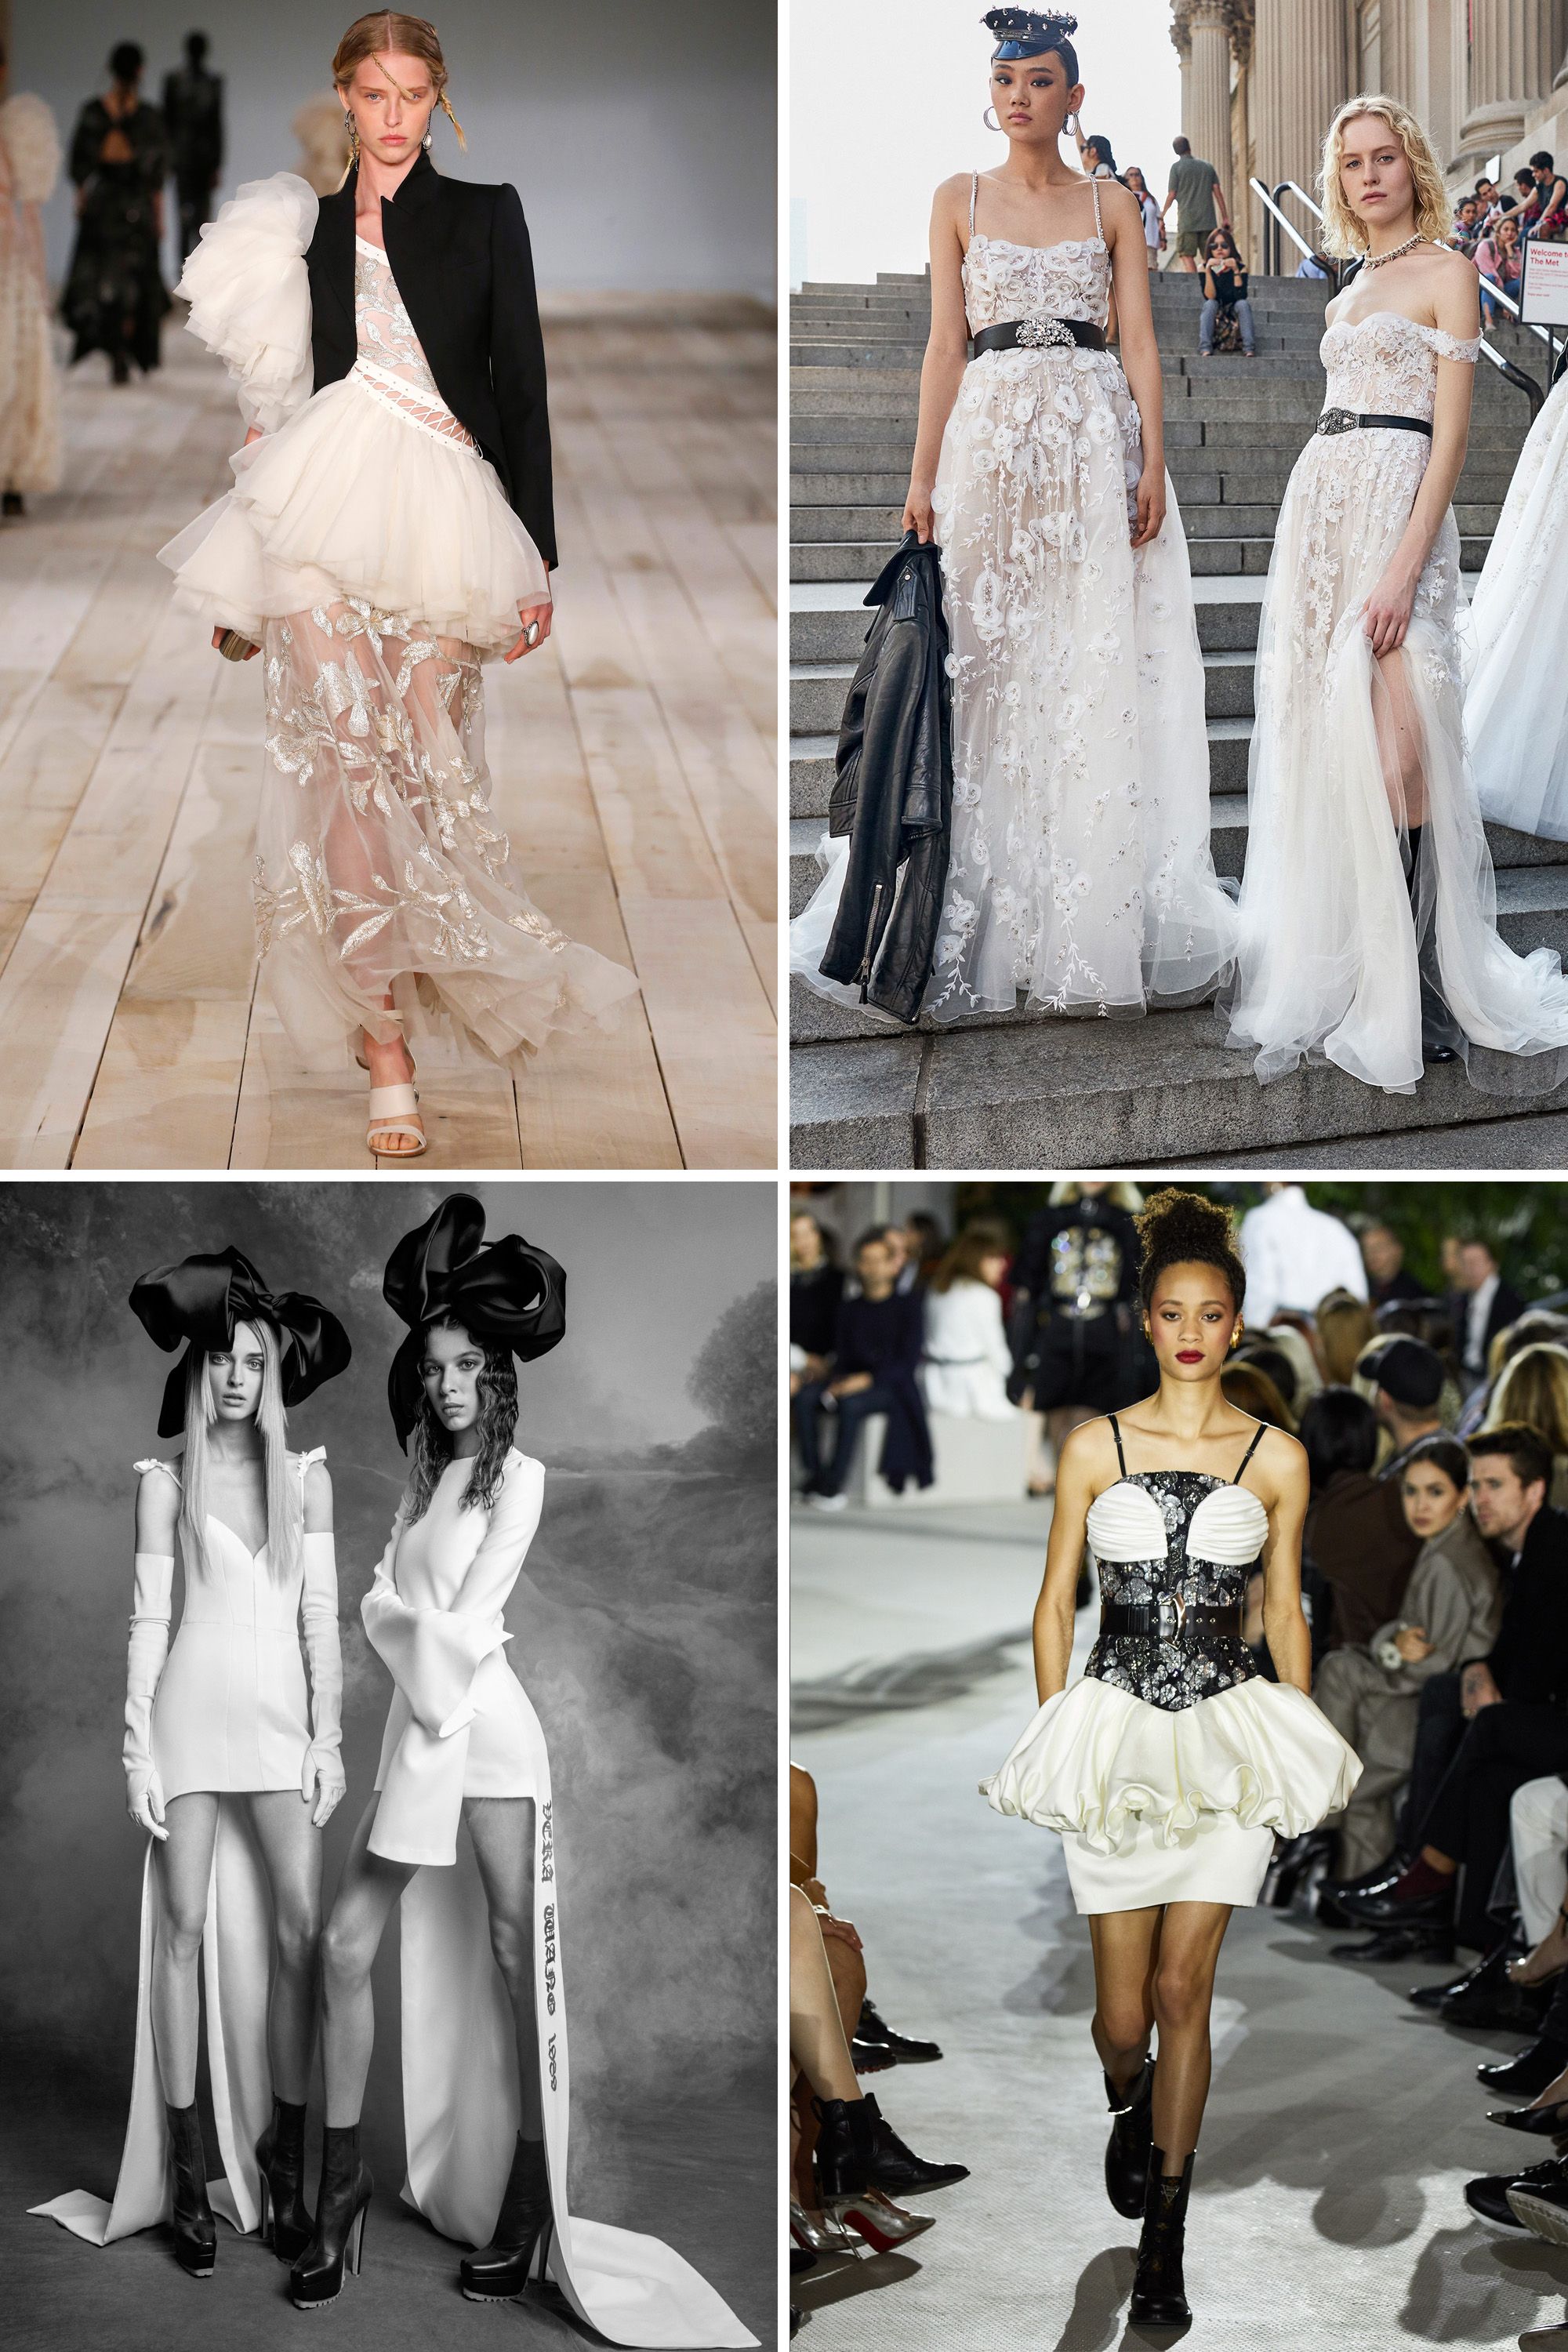 Photos from Most Show-Stopping Wedding Gowns Ever to Hit the Runway